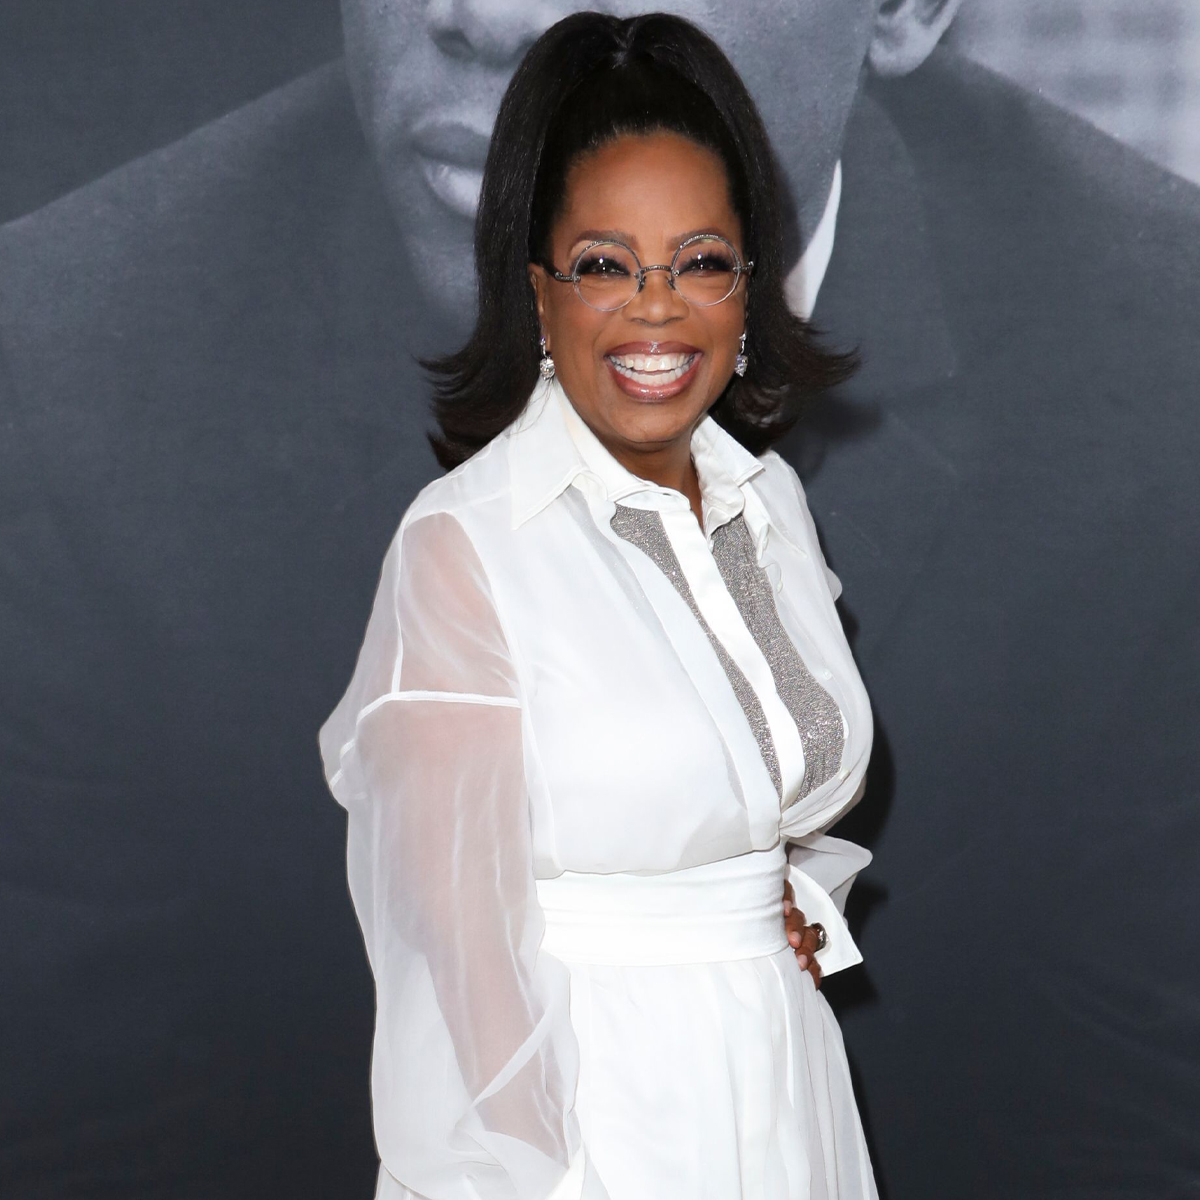 Oprah Produces Documentary On Most “Extraordinary” Person She’s Known